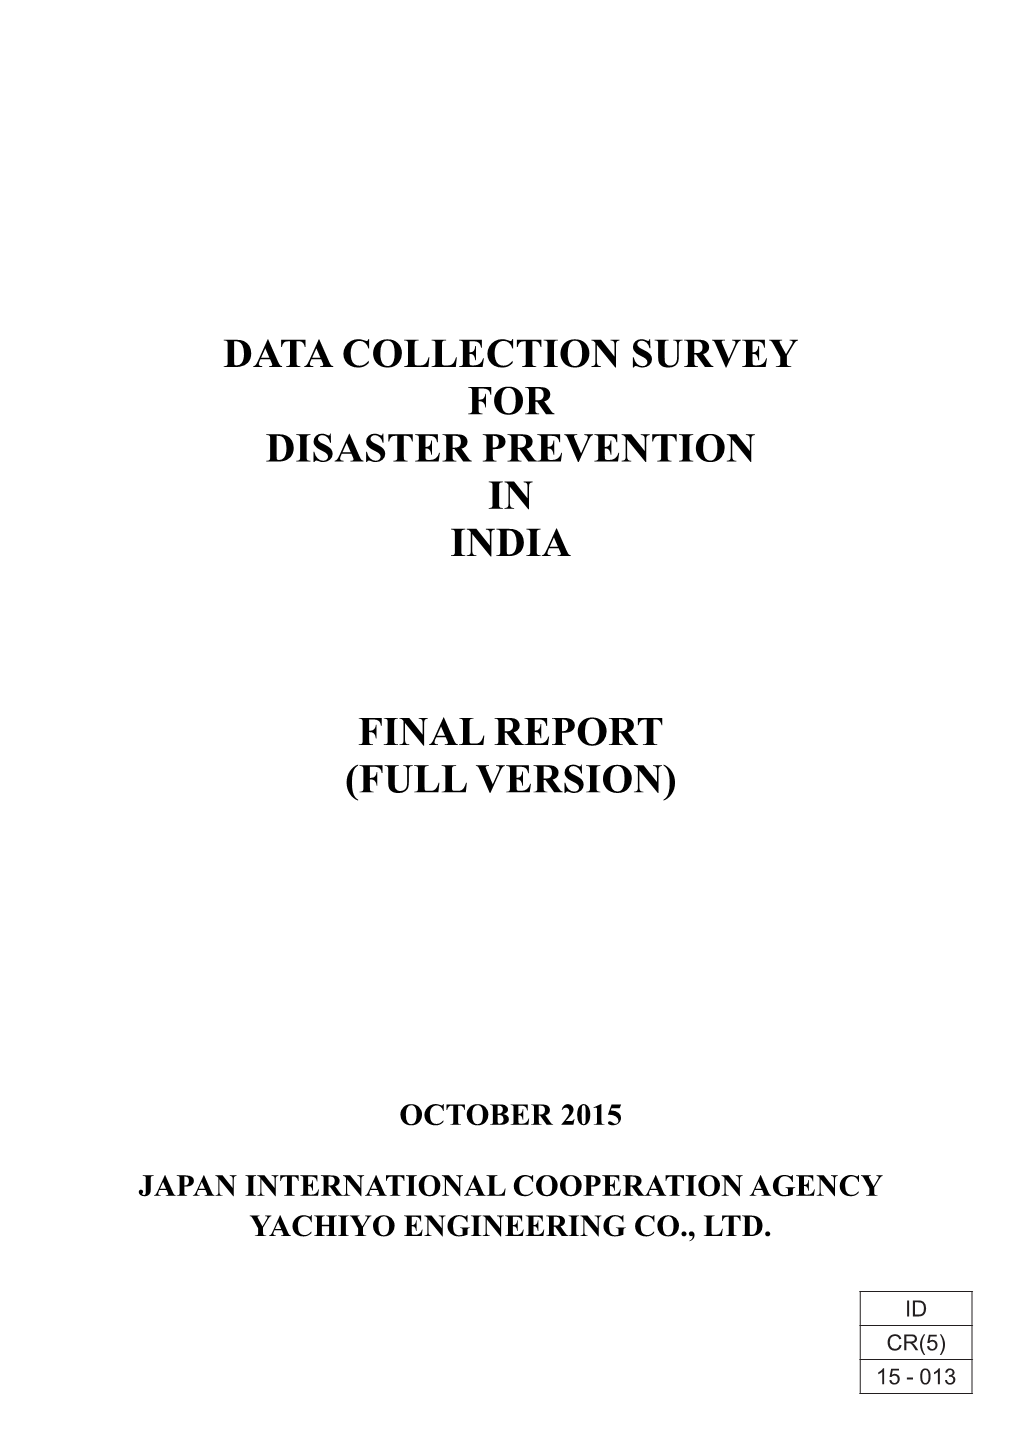 Data Collection Survey for Disaster Prevention in India